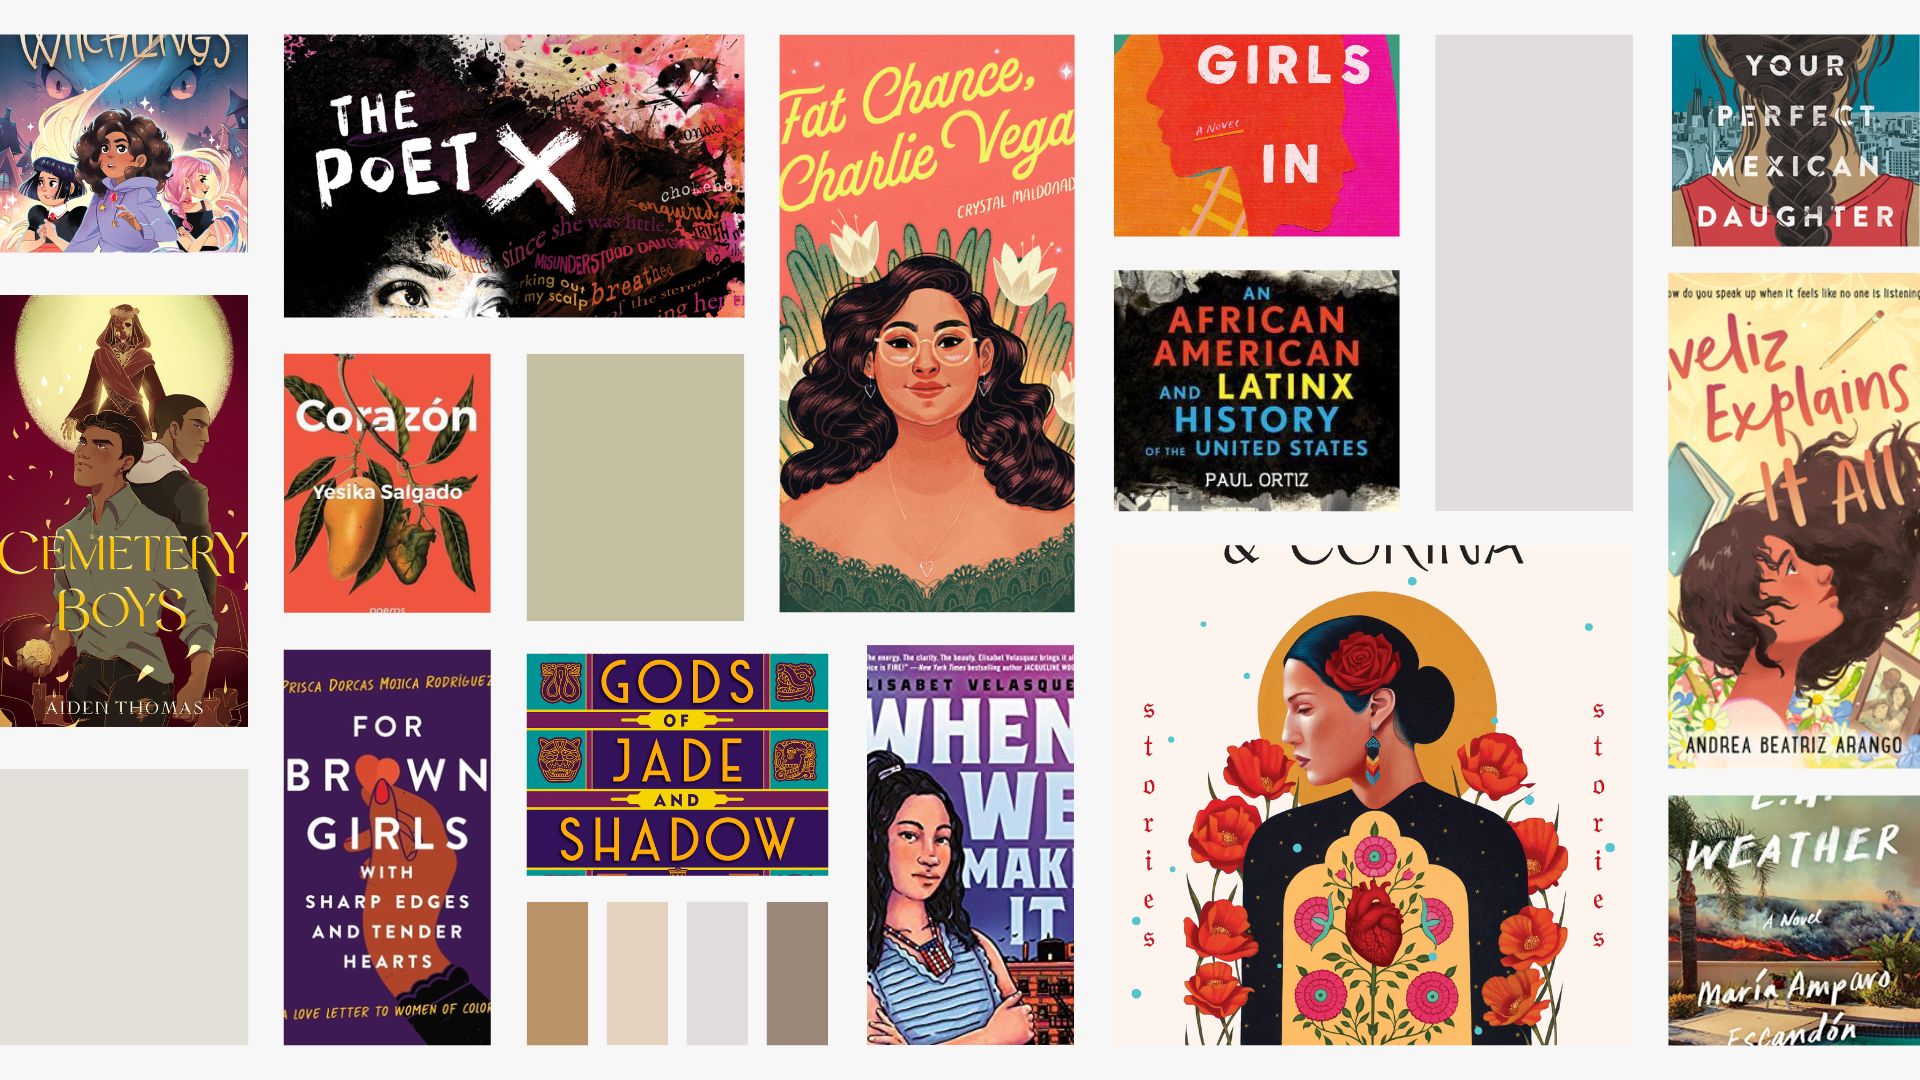 Collage of Latine book covers